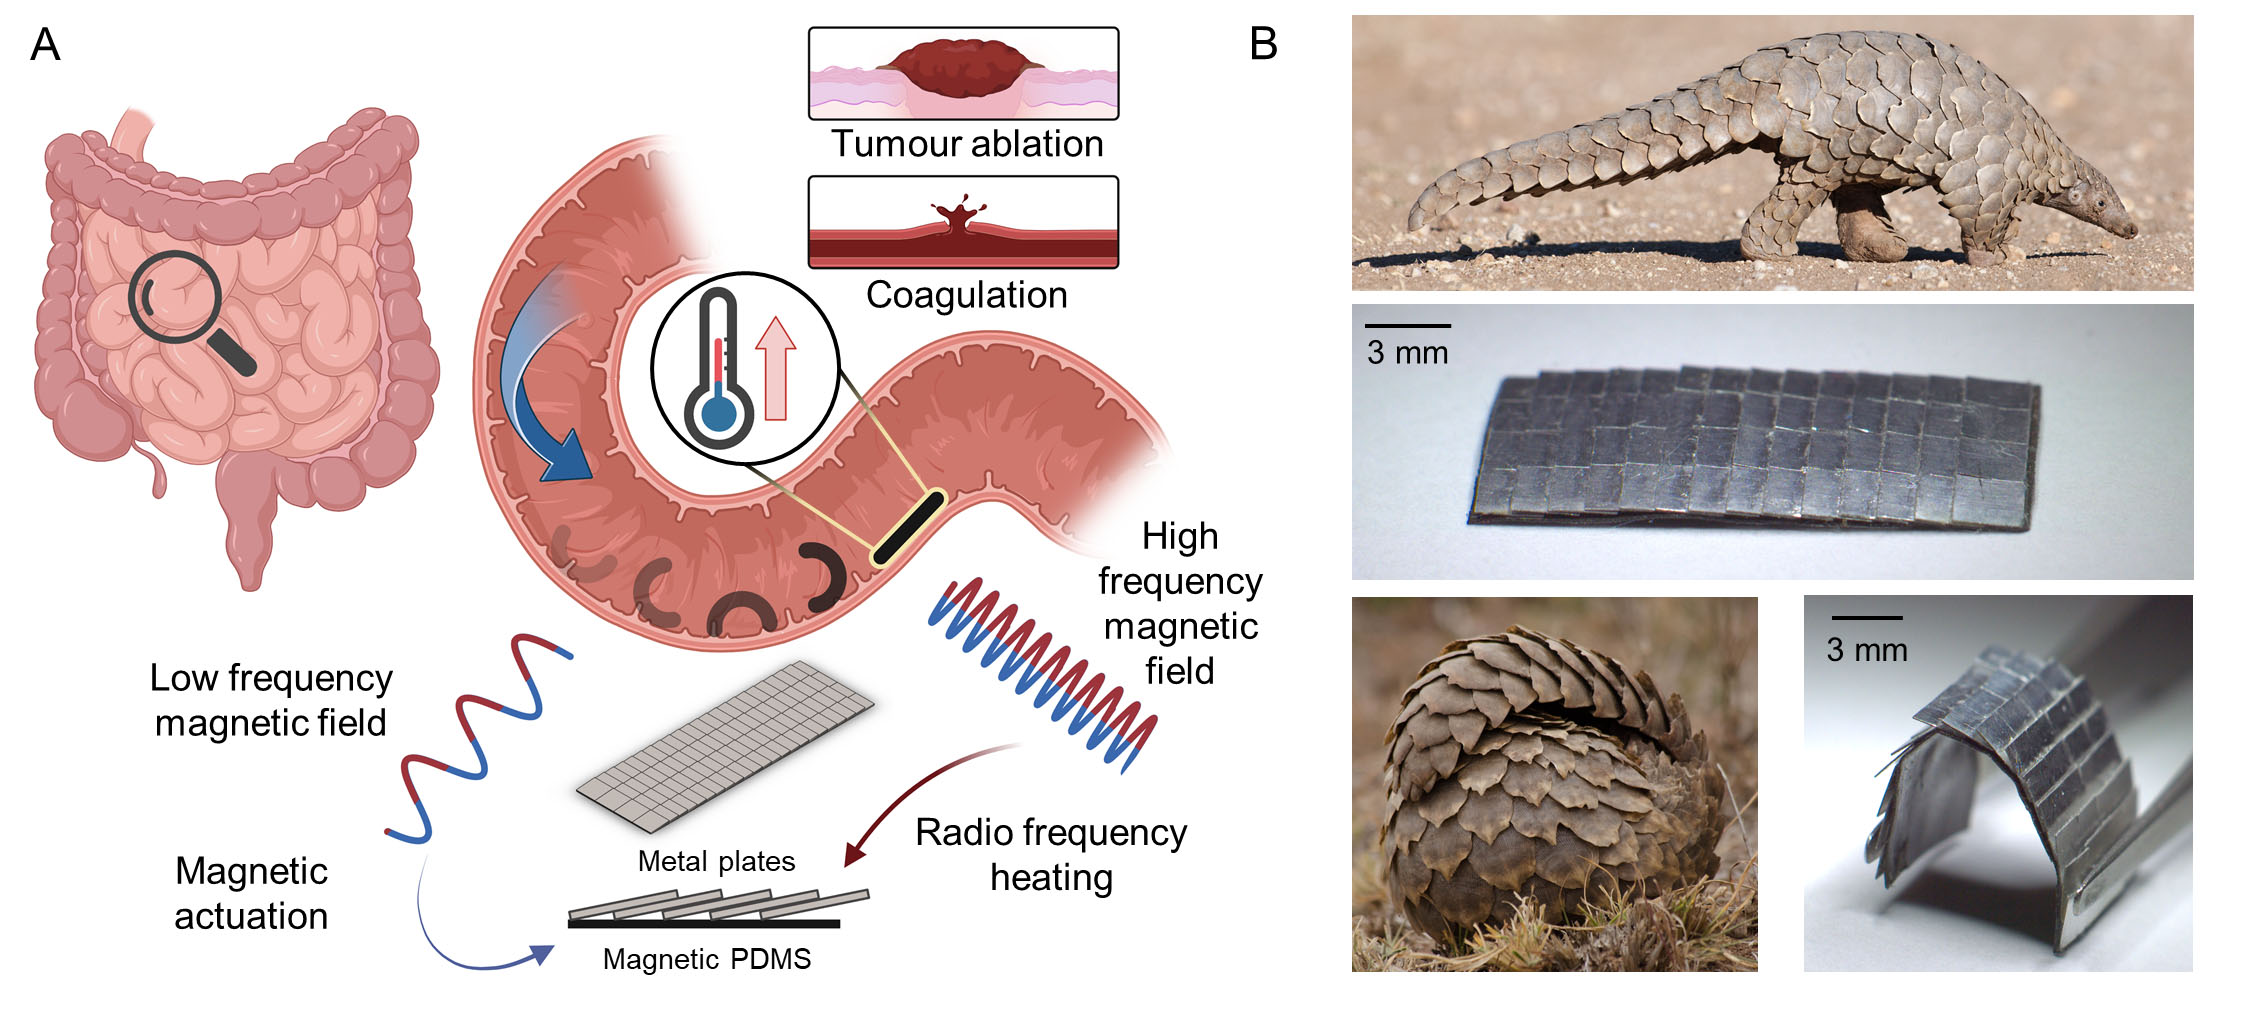 pangolin-inspired untethered magnetic robot